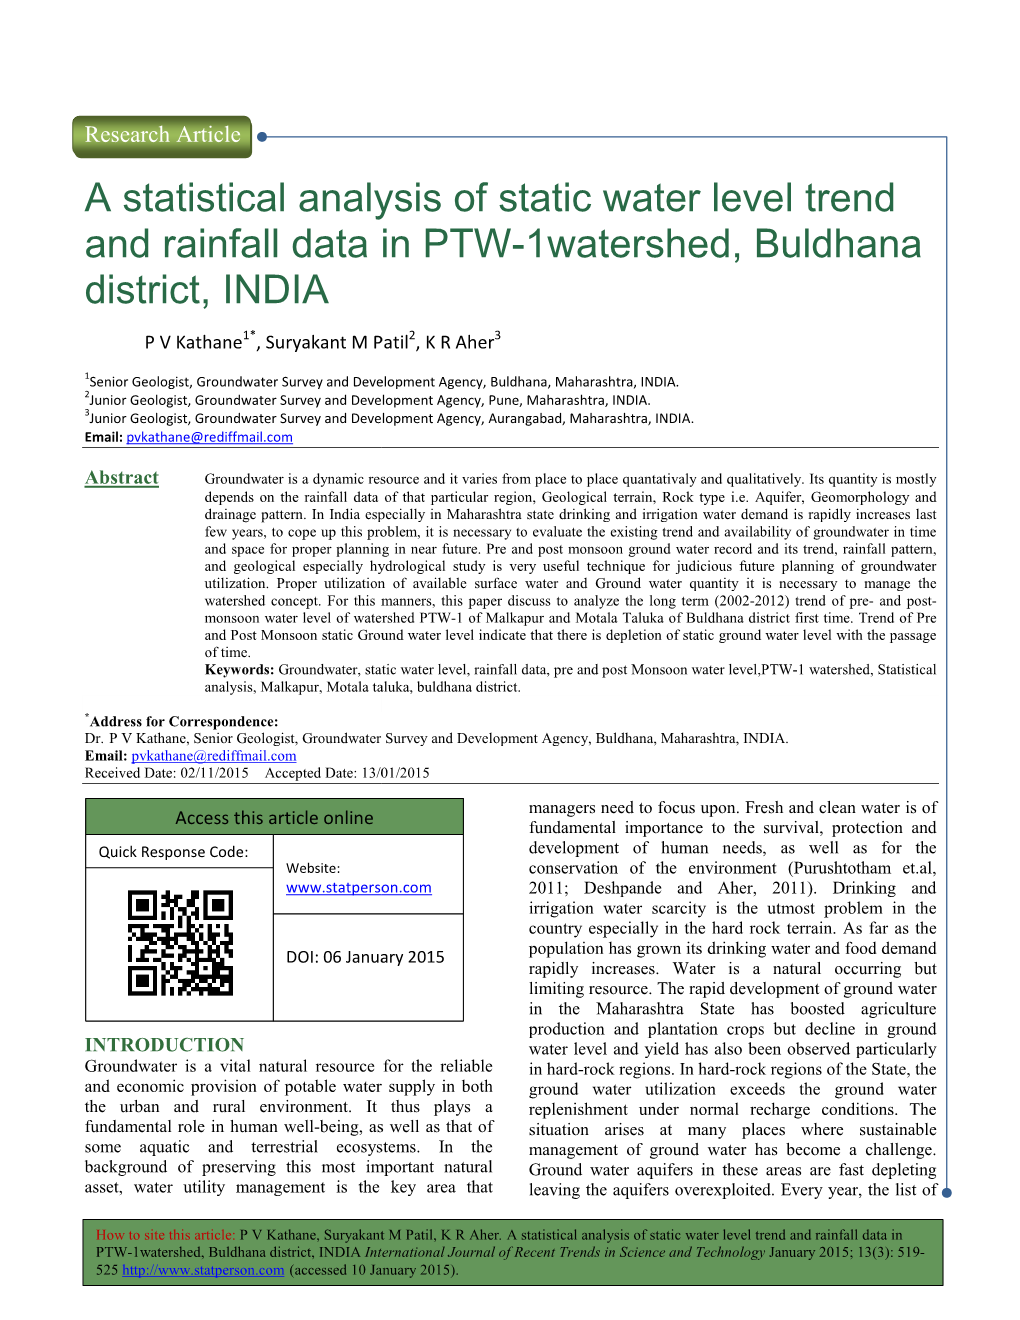 A Statistical Analysis of Static and Rainfall Data in PTW District, INDIA